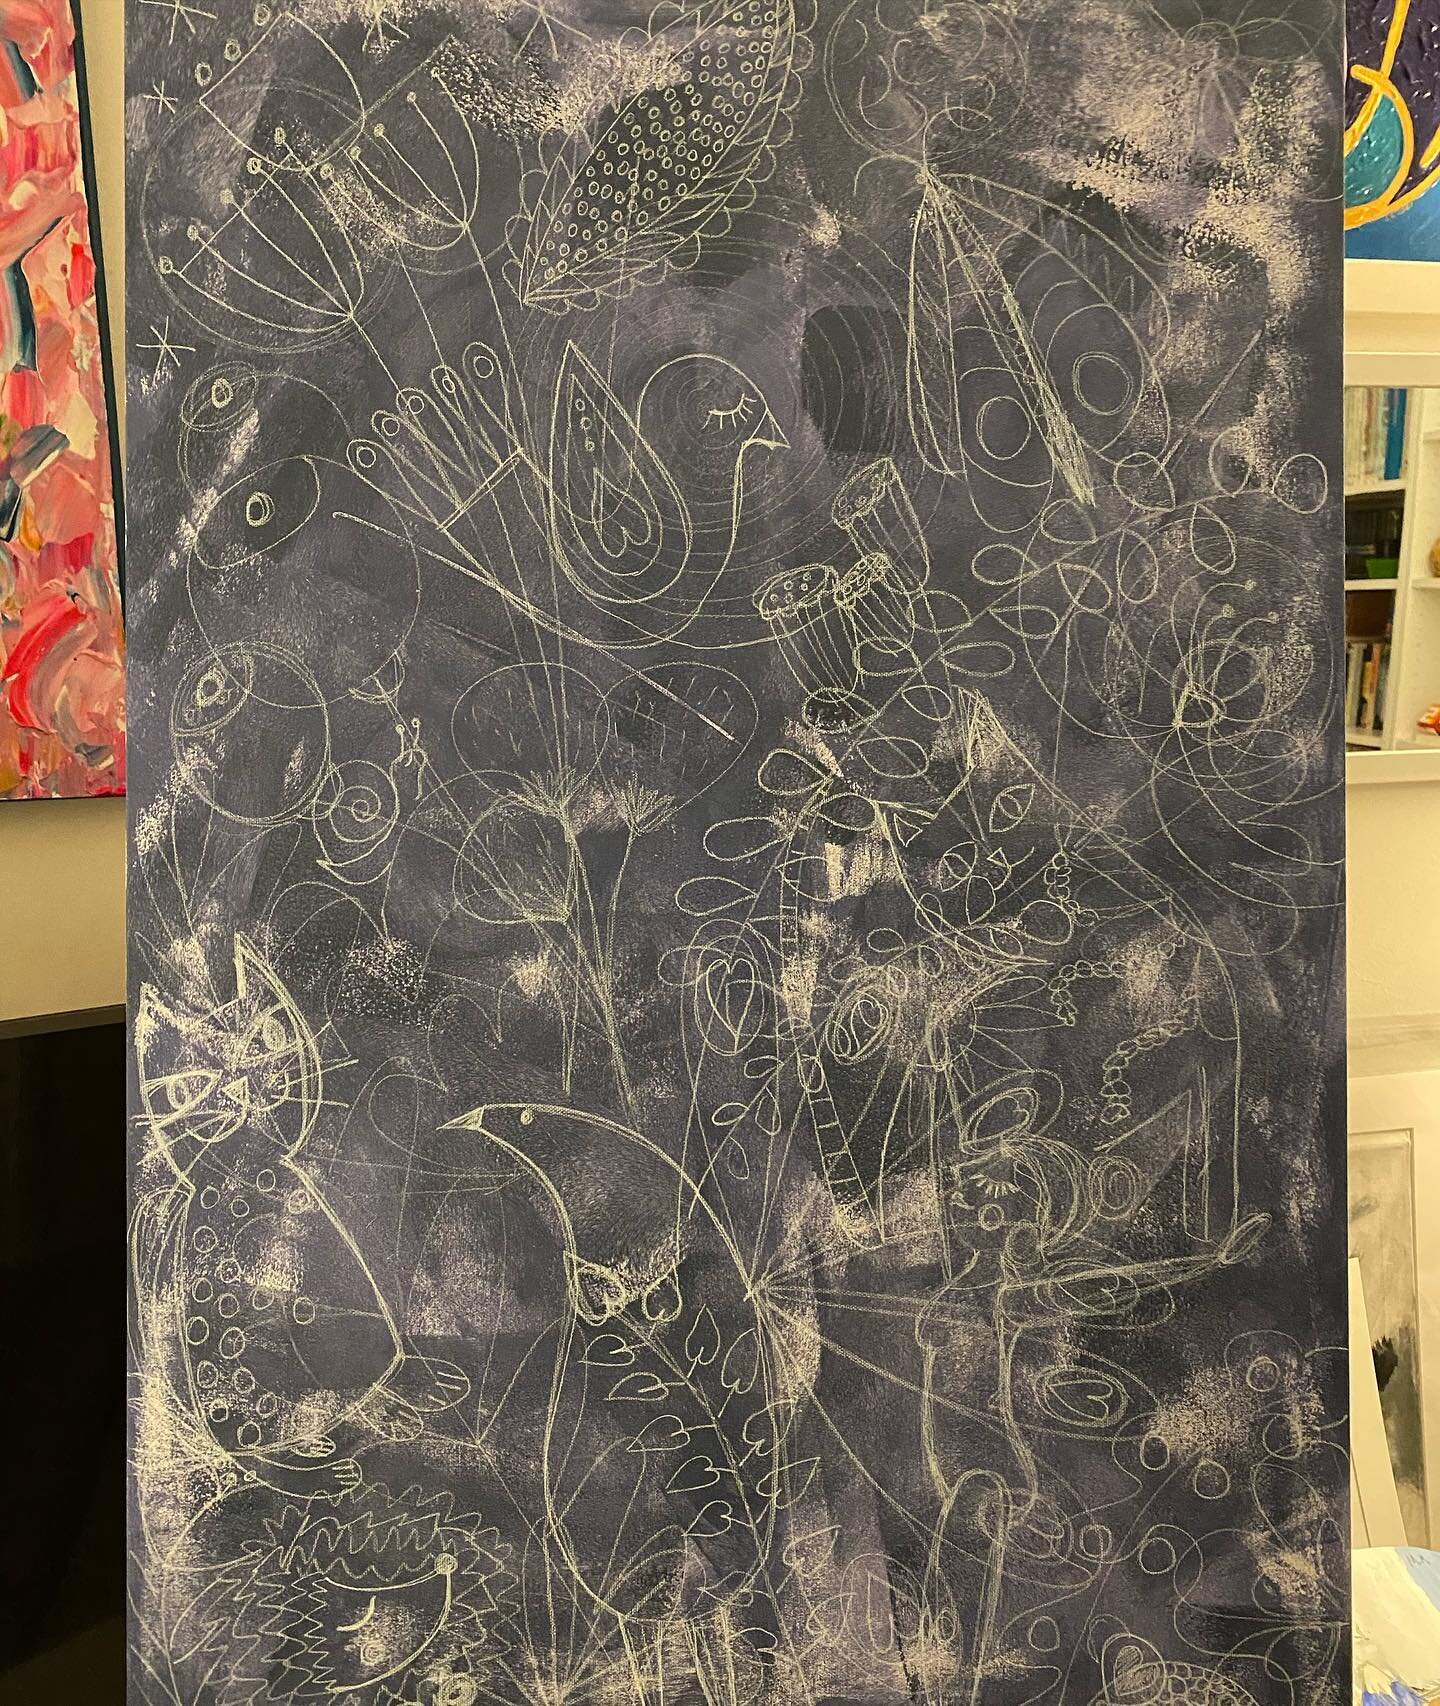 Art - Midnight Garden.
.
It&rsquo;s midnight and I&rsquo;m working on my midnight garden piece.
.
I just wanted to sketch out the start of this piece before we go away for the long weekend.
.
I&rsquo;d already done a rough blue background so my chalk